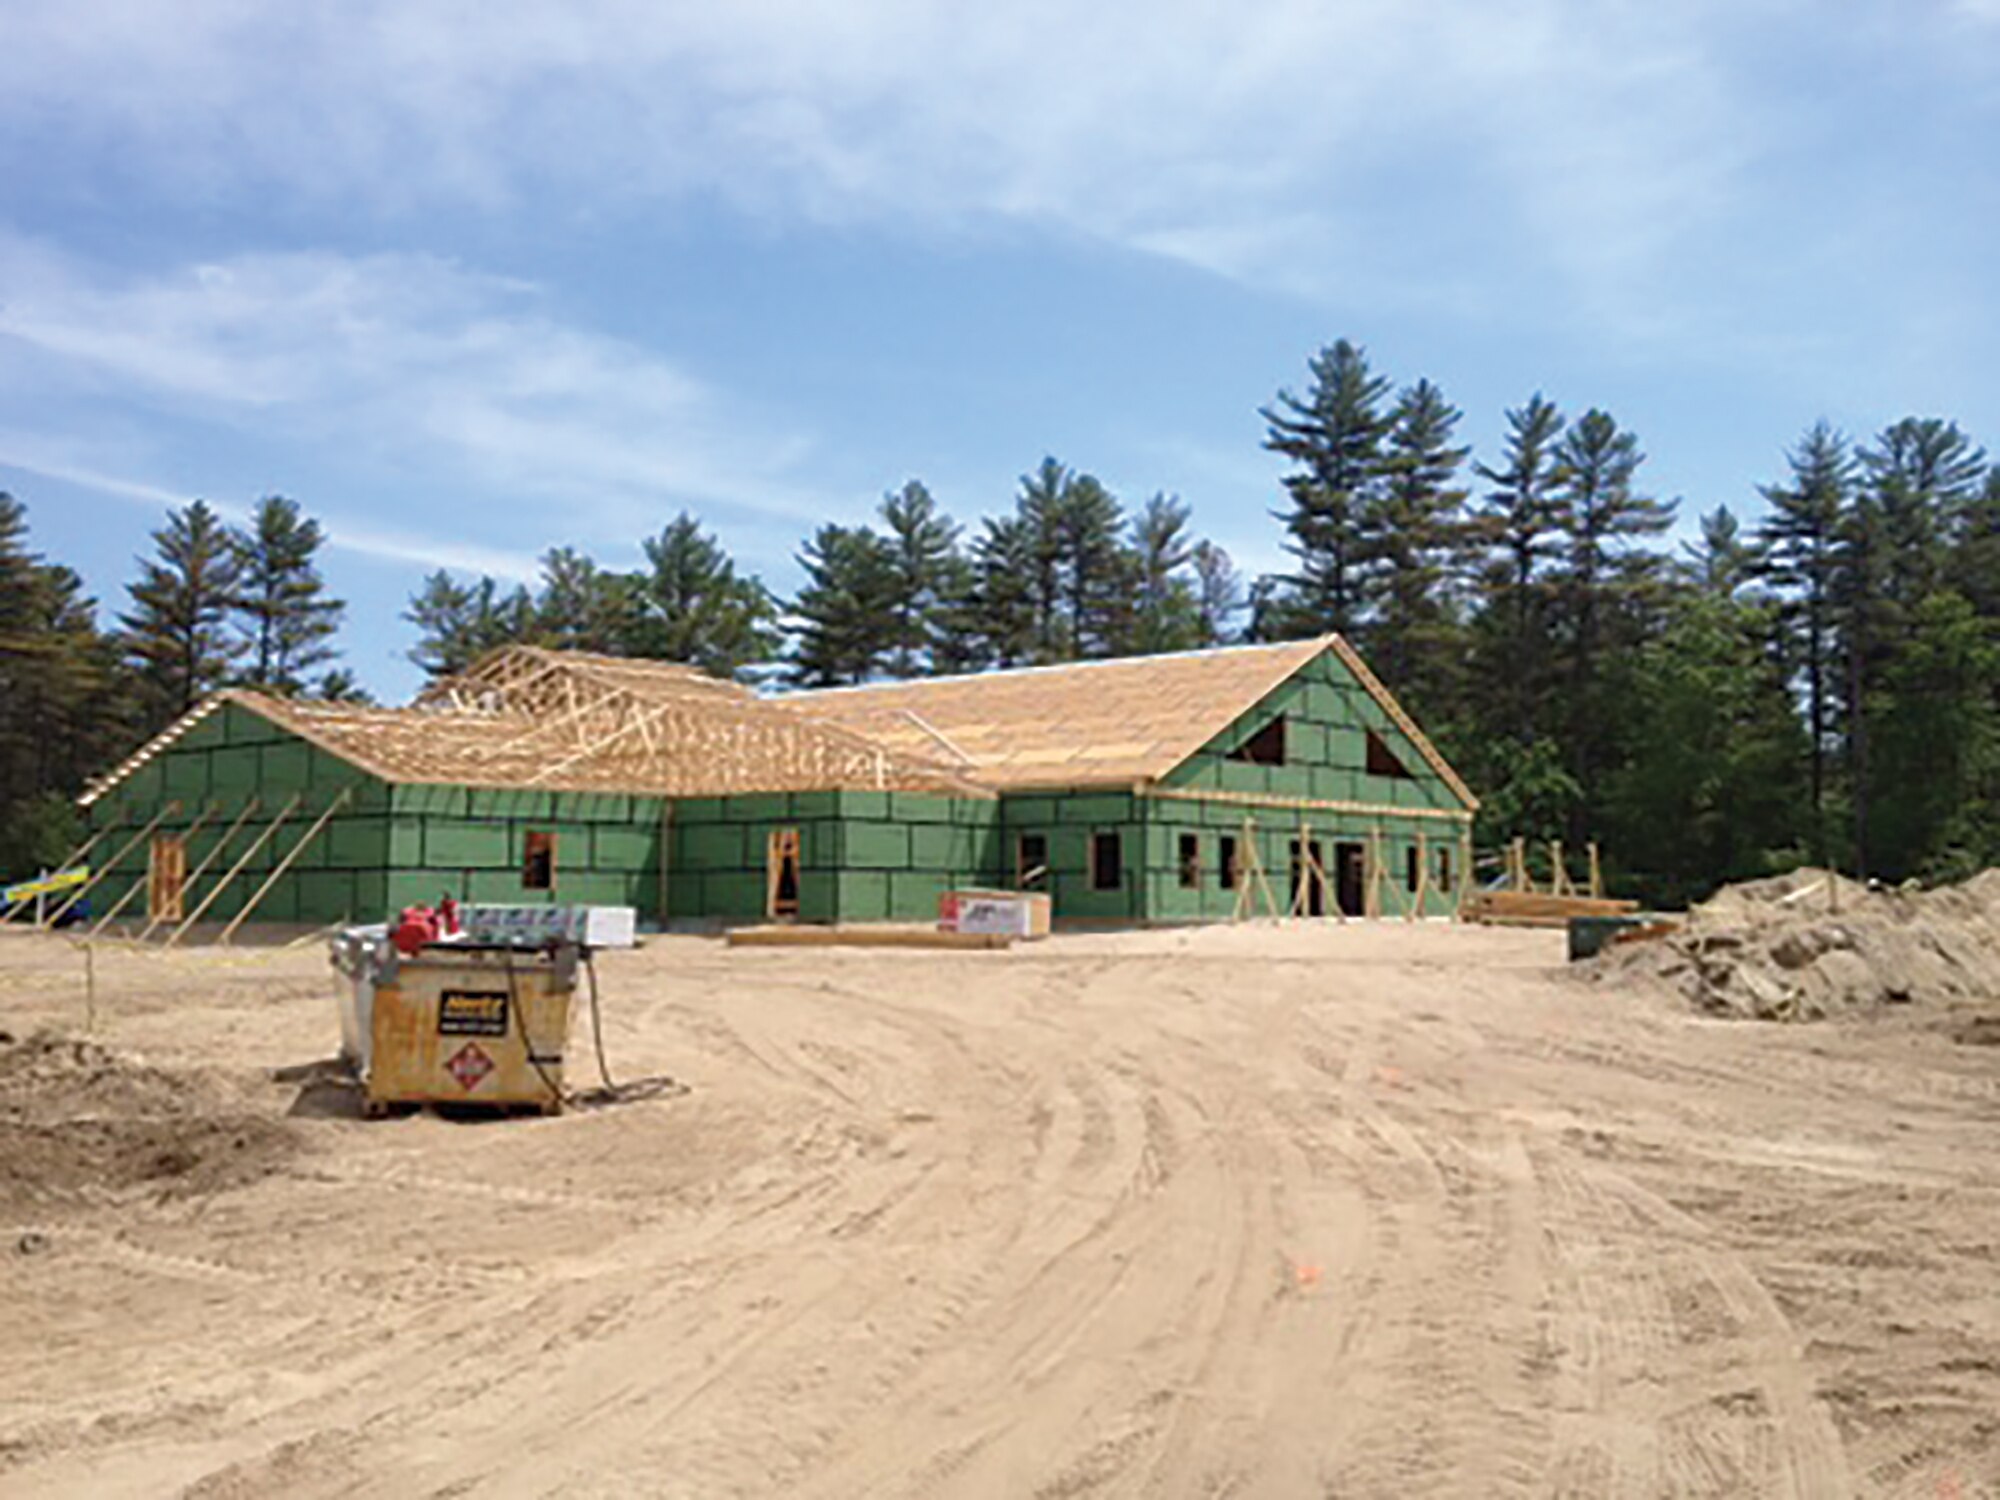 445th Civil Engineer Squadron Airmen helped construct a 20,000 square feet, multi-use building over the summer during their two-week annual tour at the Boy Scouts of America’s Camp William Hinds in Raymond, Maine. The CES Airmen helped dig drainage trenches, build wood framing for the roof and installed five layers of roof decking and 35 windows. (Courtesy photo)